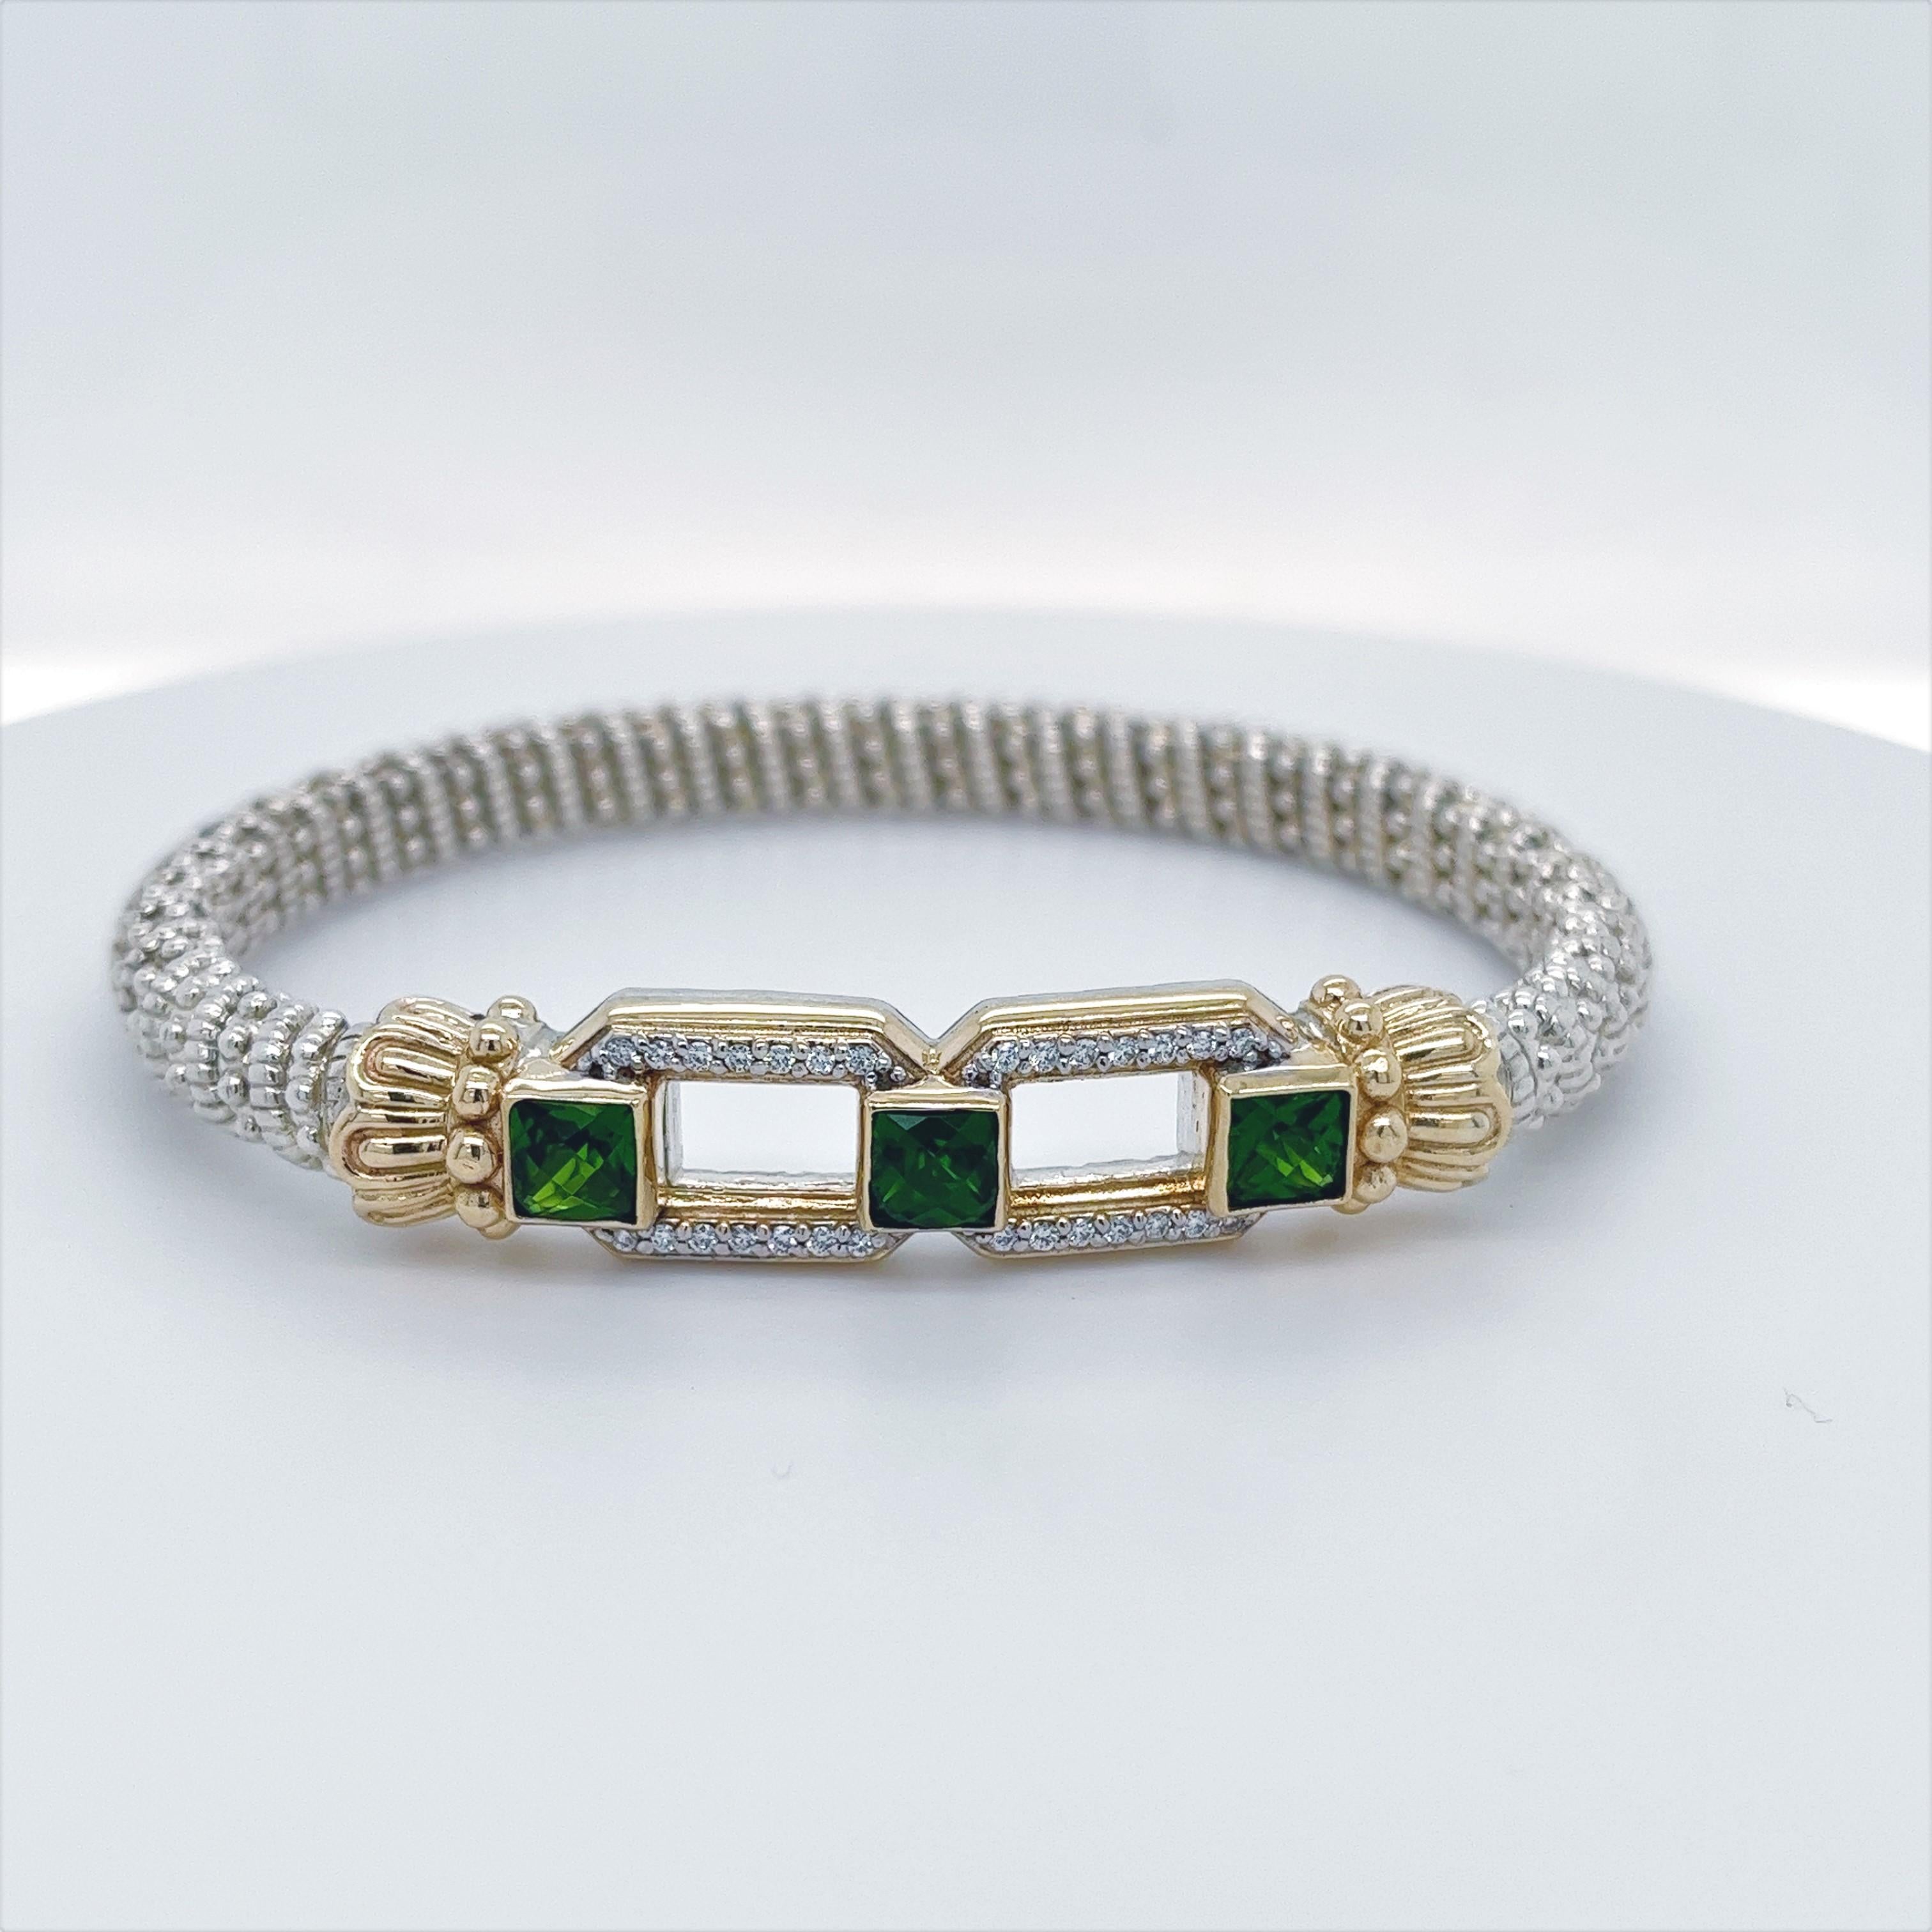 All of your friend's will be in a flutter when they see this beautiful bracelet gracing your wrist. This 8mm bracelet by Alwand Vahan is sterling silver, 14k yellow gold, and has .21 carats of diamonds and three princess cut green chrome diopside